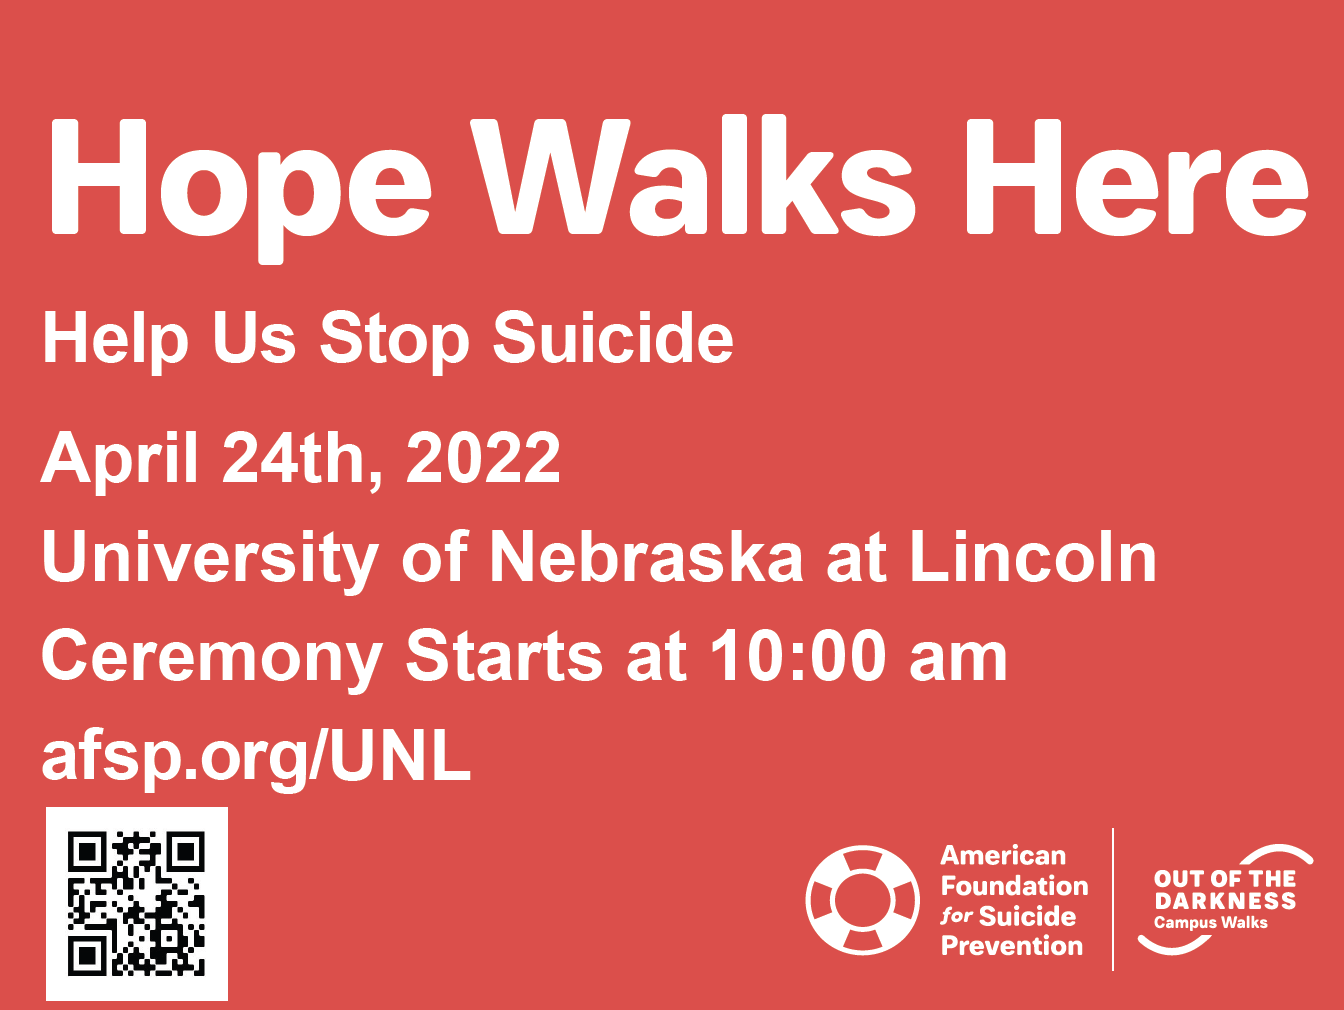 Out Of The Darkness Walk For Suicide Prevention Awareness April 24 Nebraska Today University